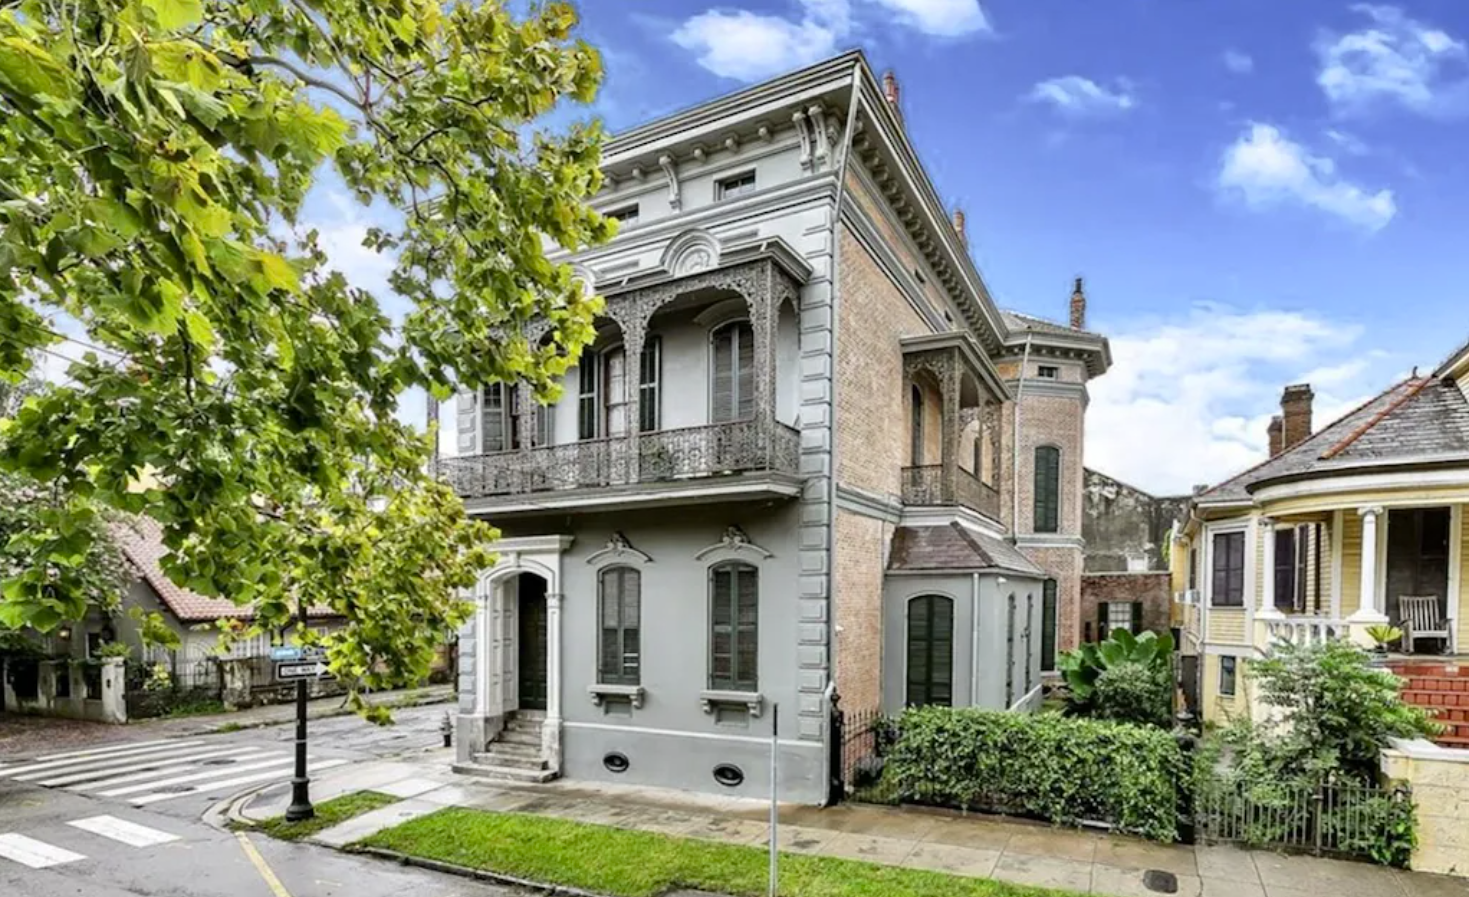 AN exterior image of a large two-story mansion on the corner in New Orleans. The front façade is gray concrete, and the side is a lighter, tan stone. Windows cover the front and sides of the building, and there's a small private patio on the side of the home.